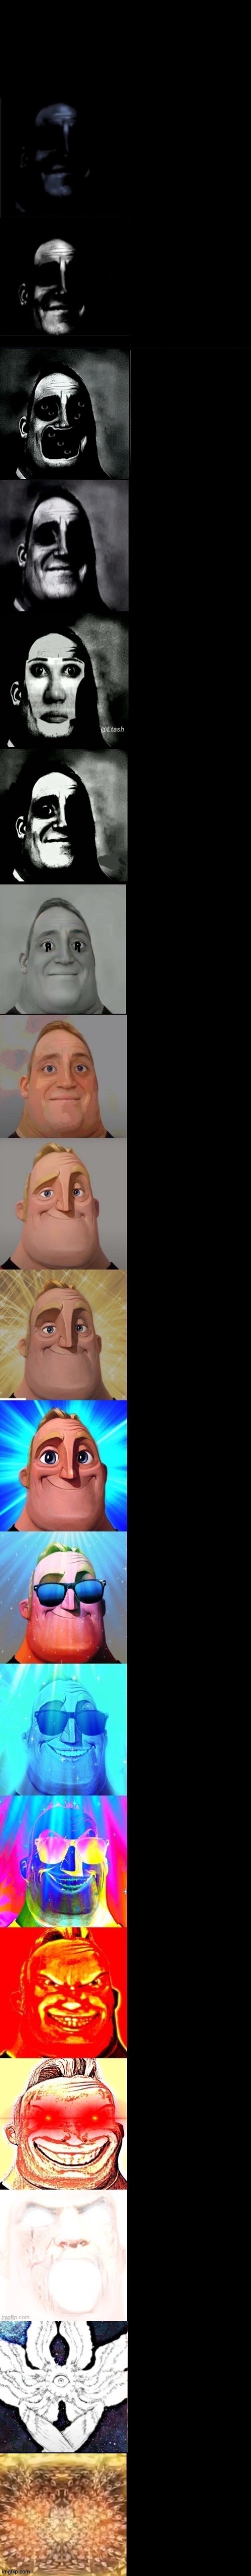 High Quality Mr Incredible Becoming Distorted to God Blank Meme Template